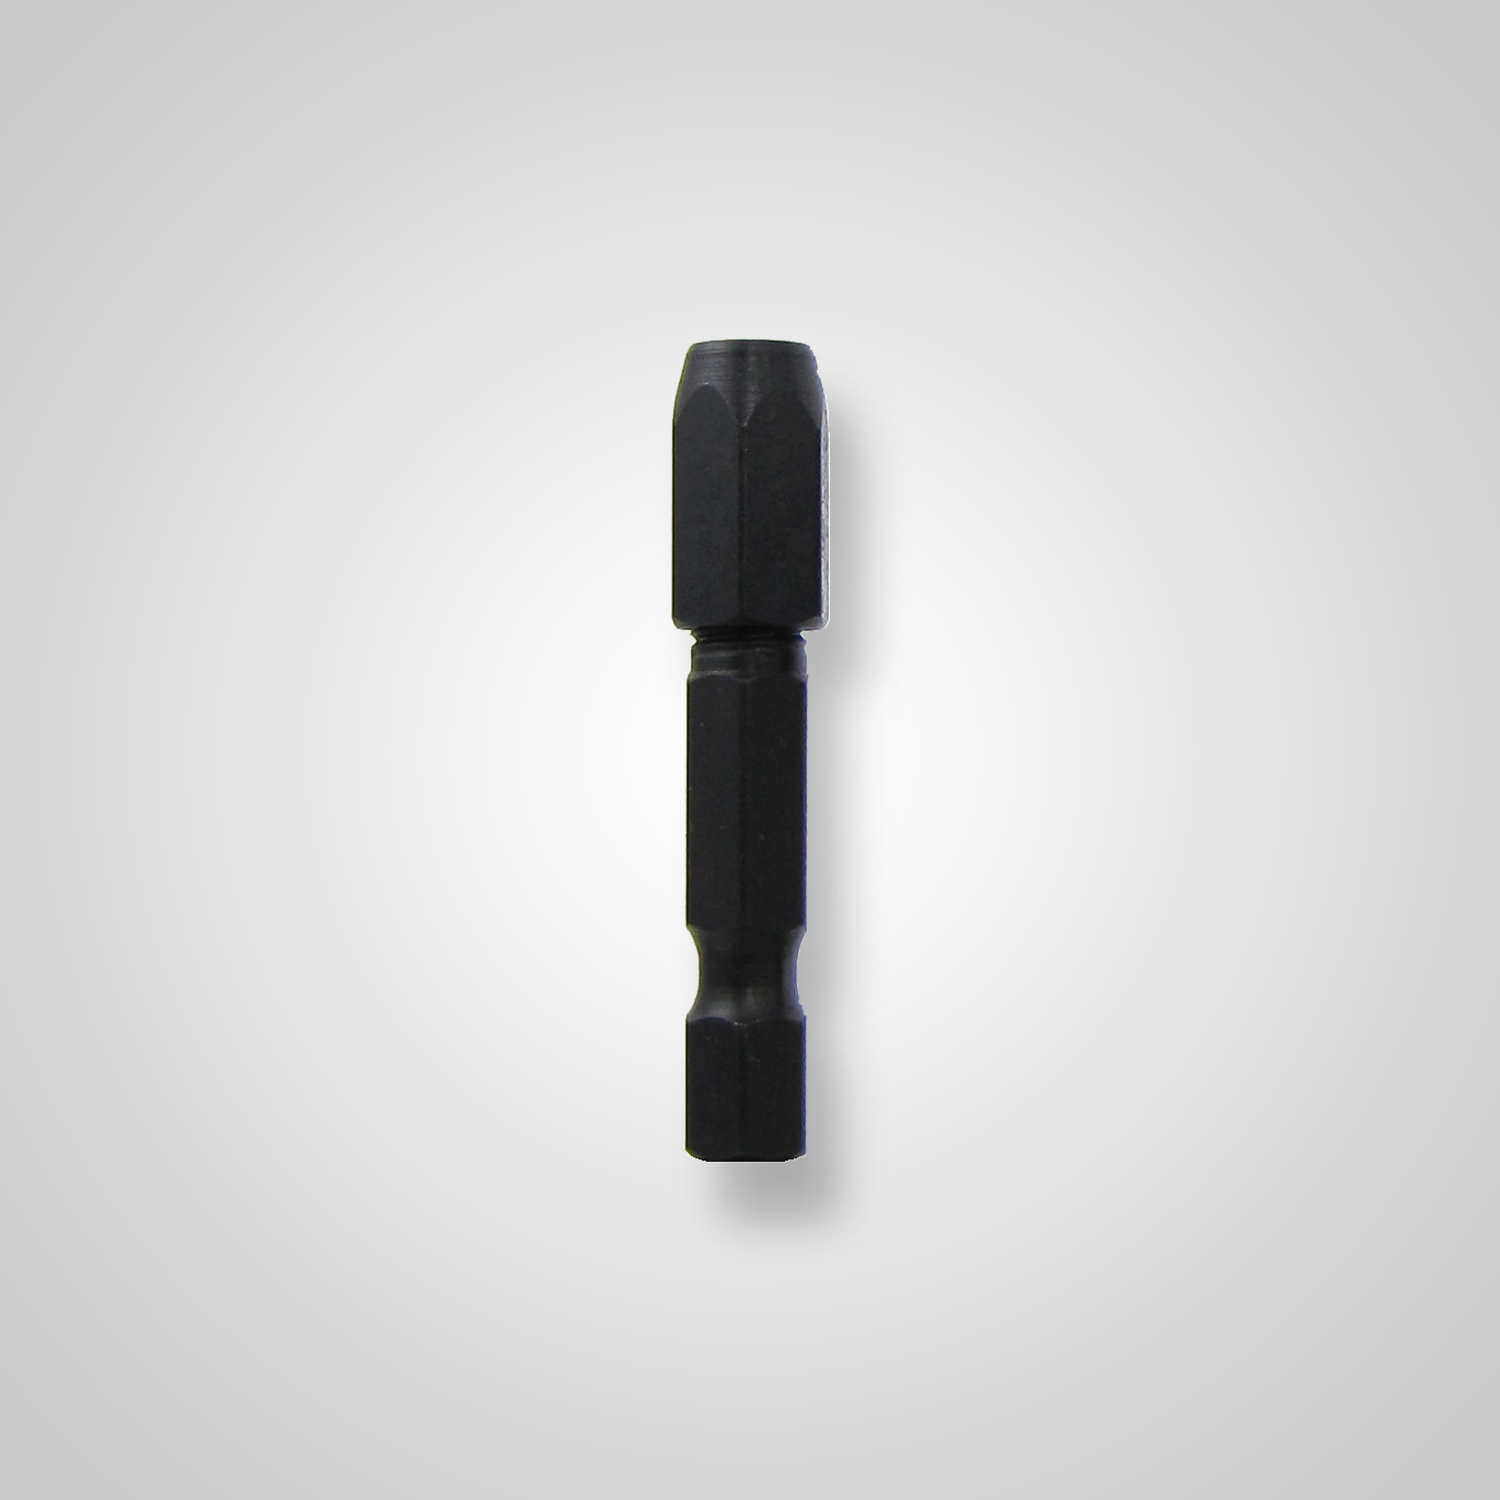 Black Trend WP-SNAP/D/564 Snappy 5/64 Drill bit only 